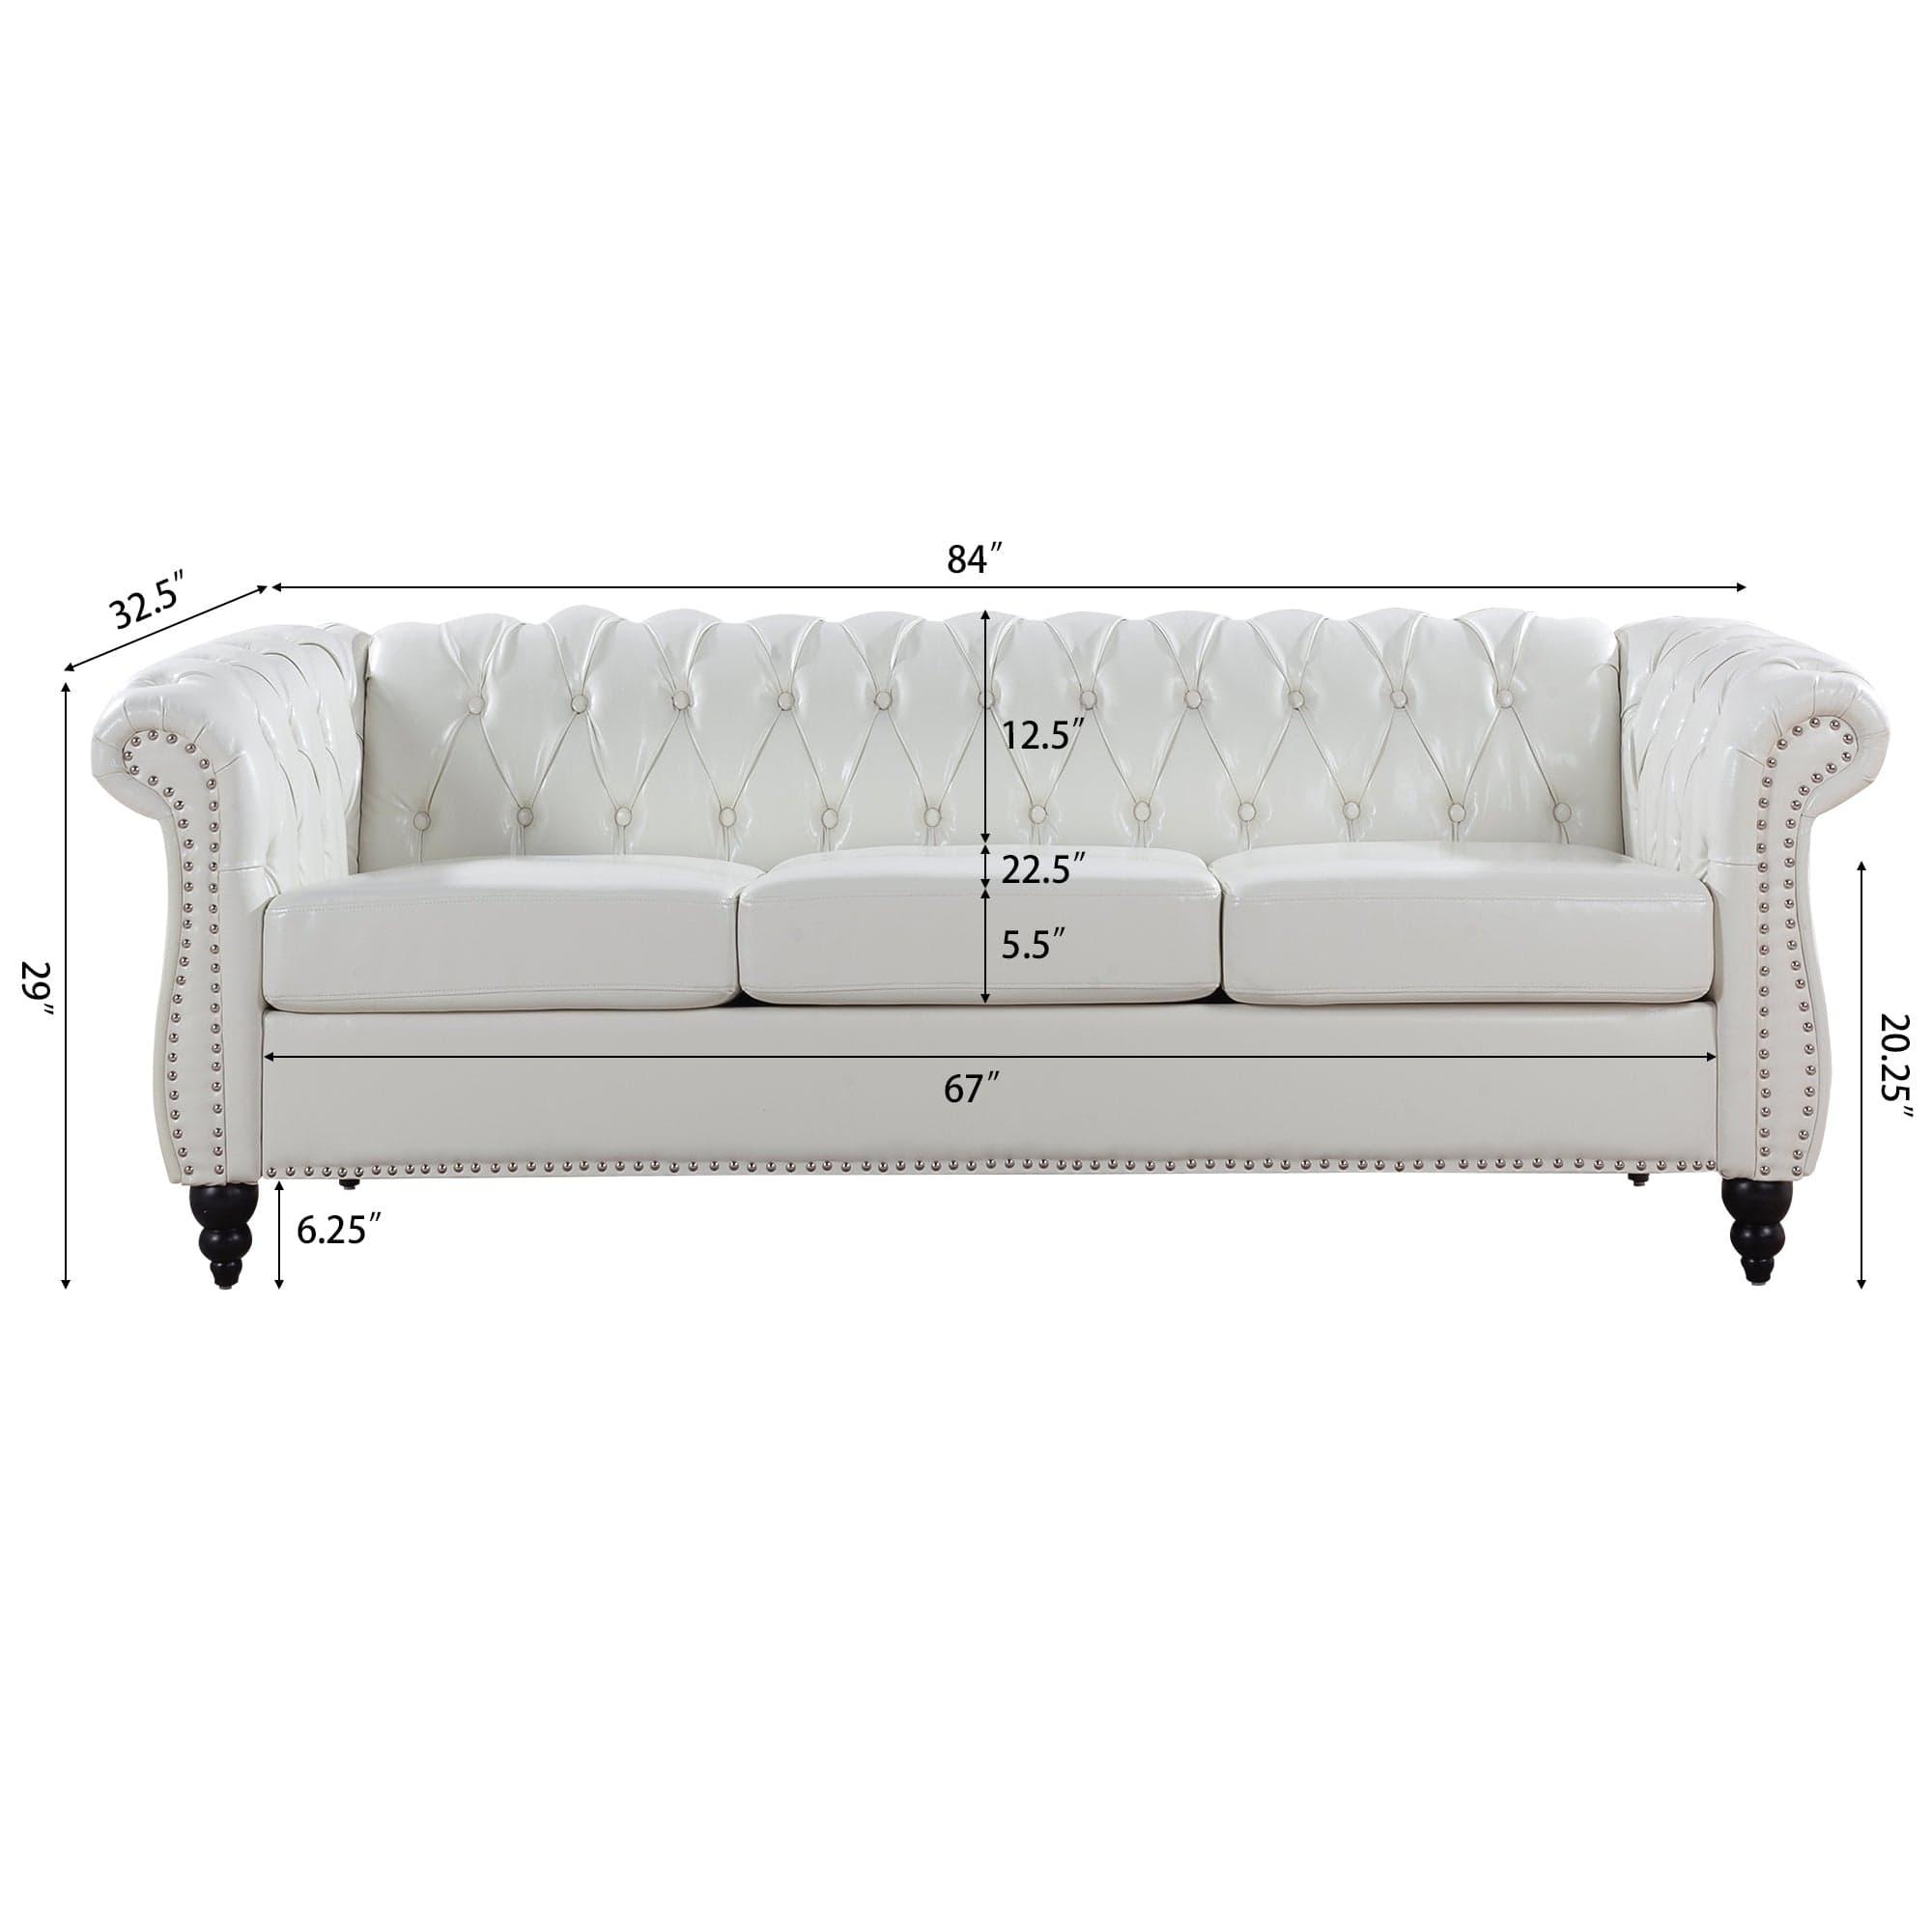 Shop 84" Rolled Arm Chesterfield 3 Seater Sofa Mademoiselle Home Decor